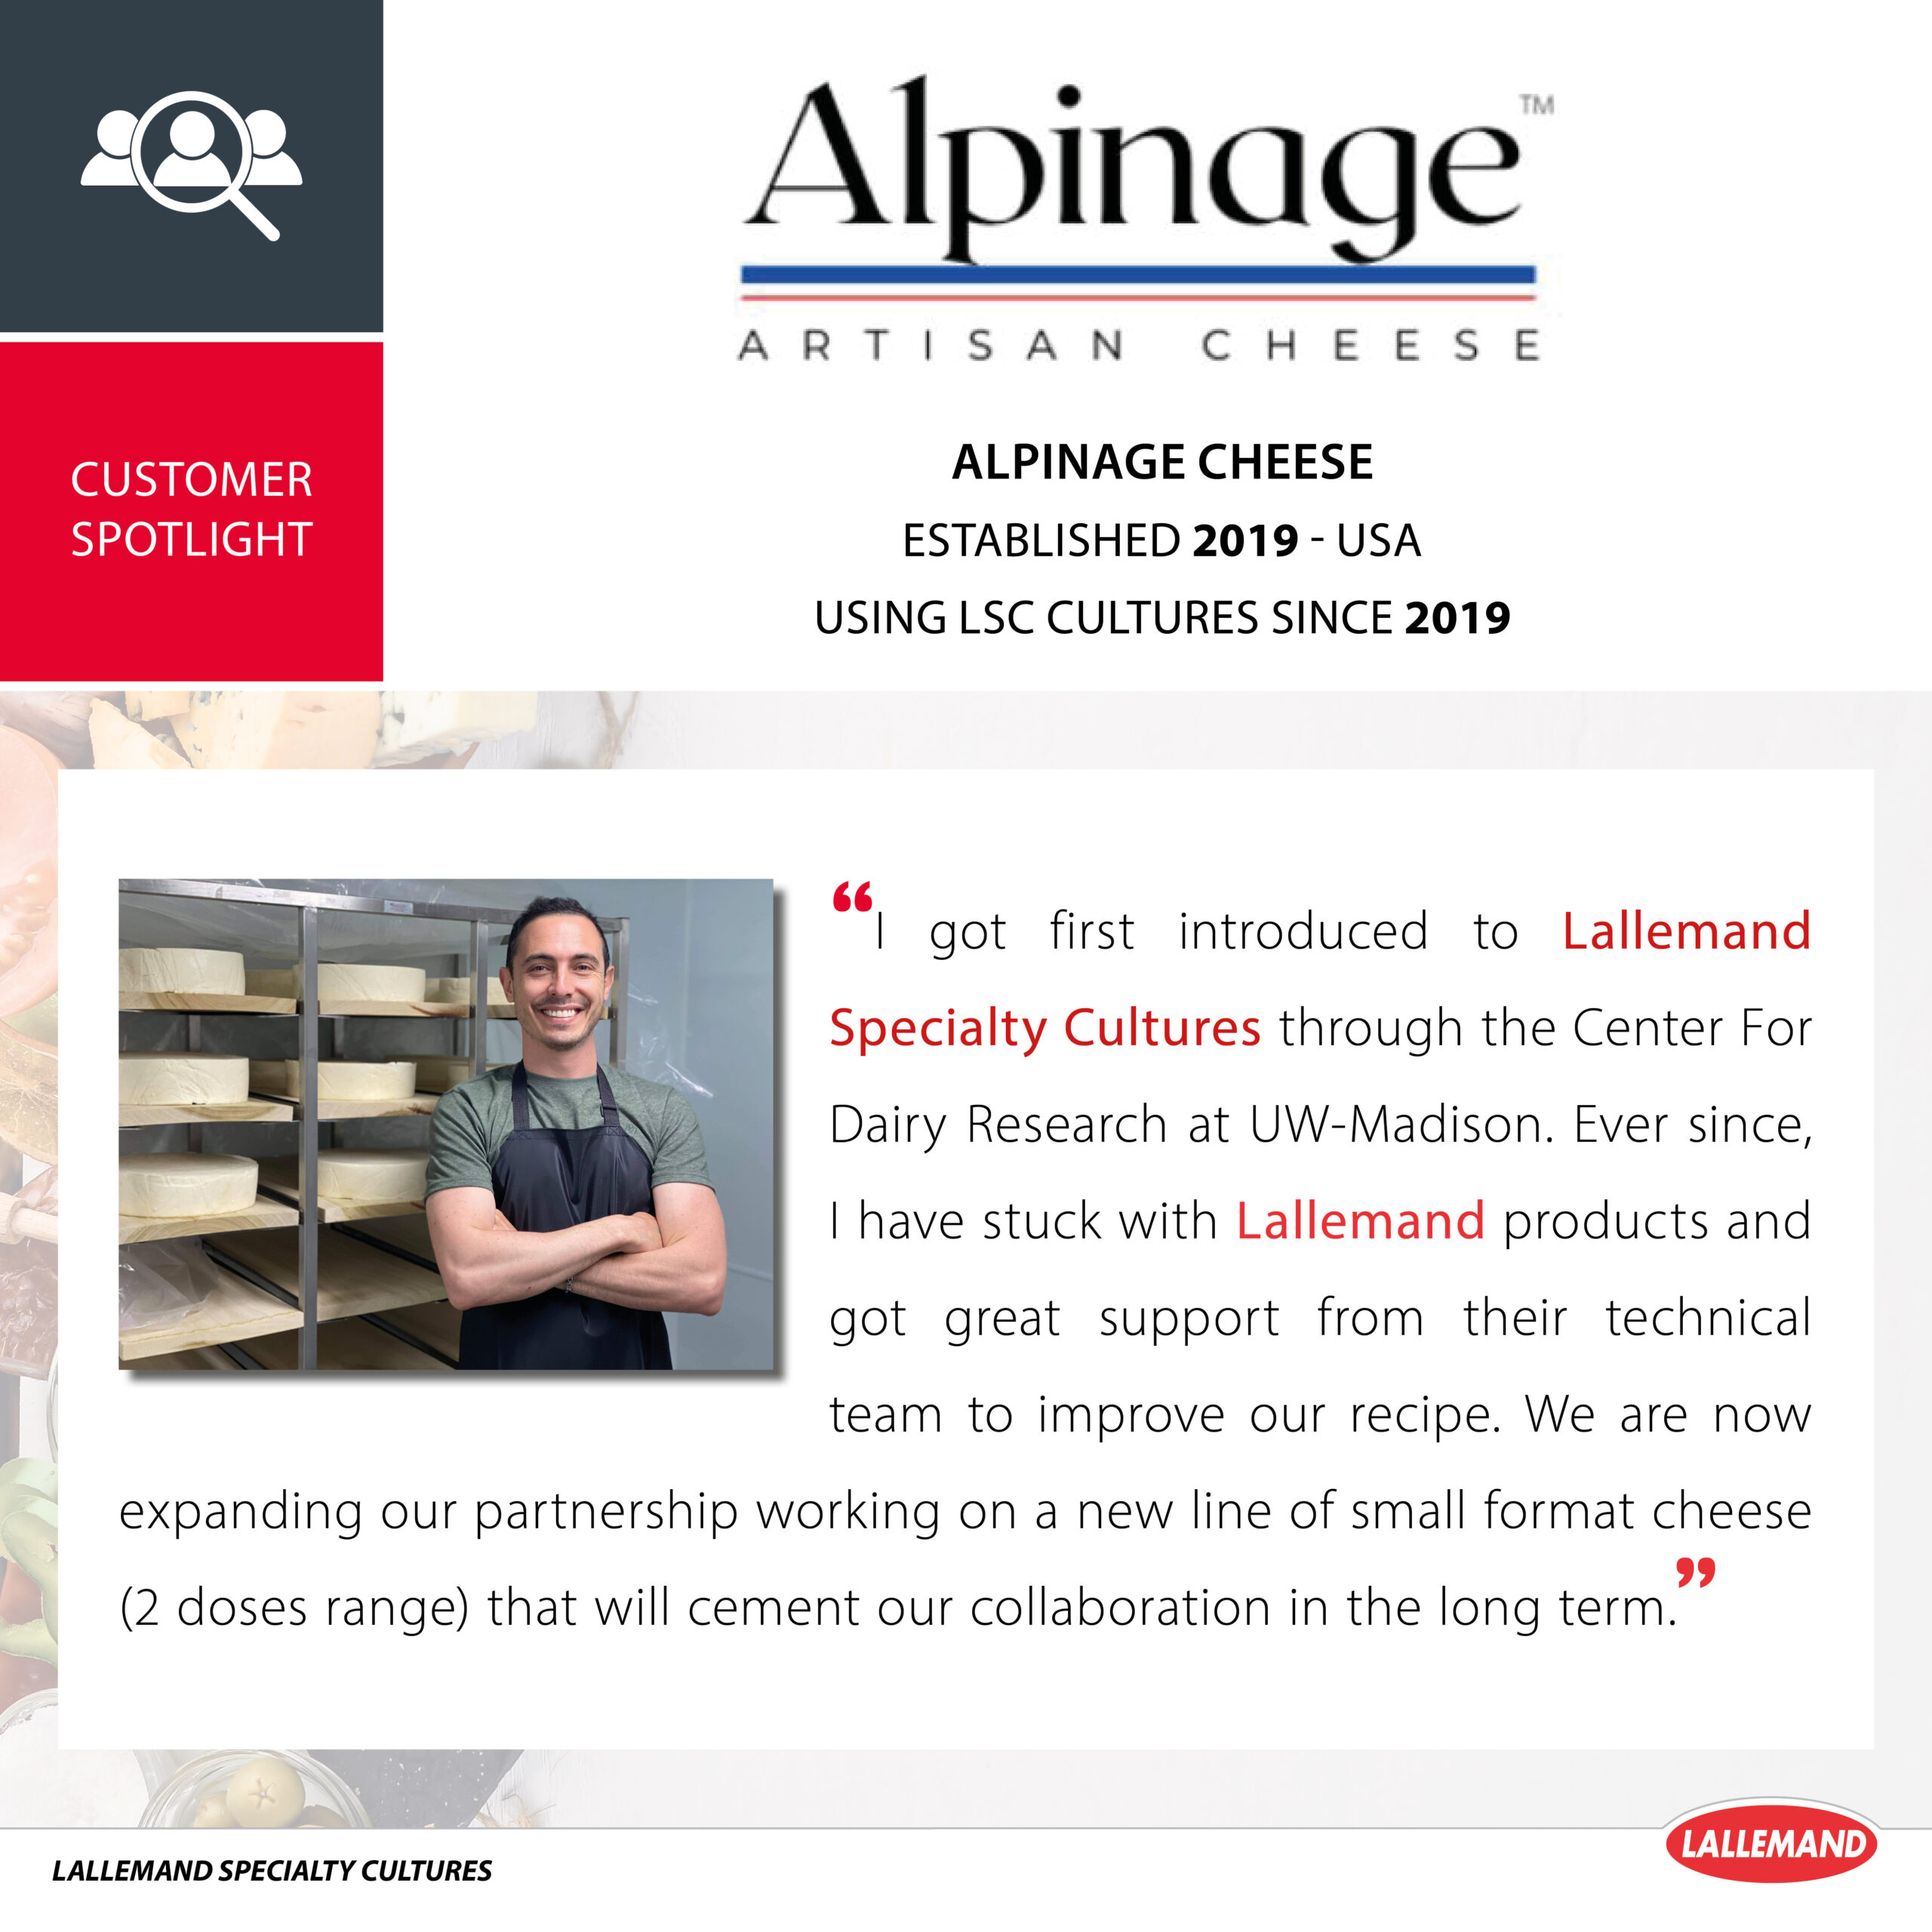 Discover Alpinage Cheese, Lallemand’s customer